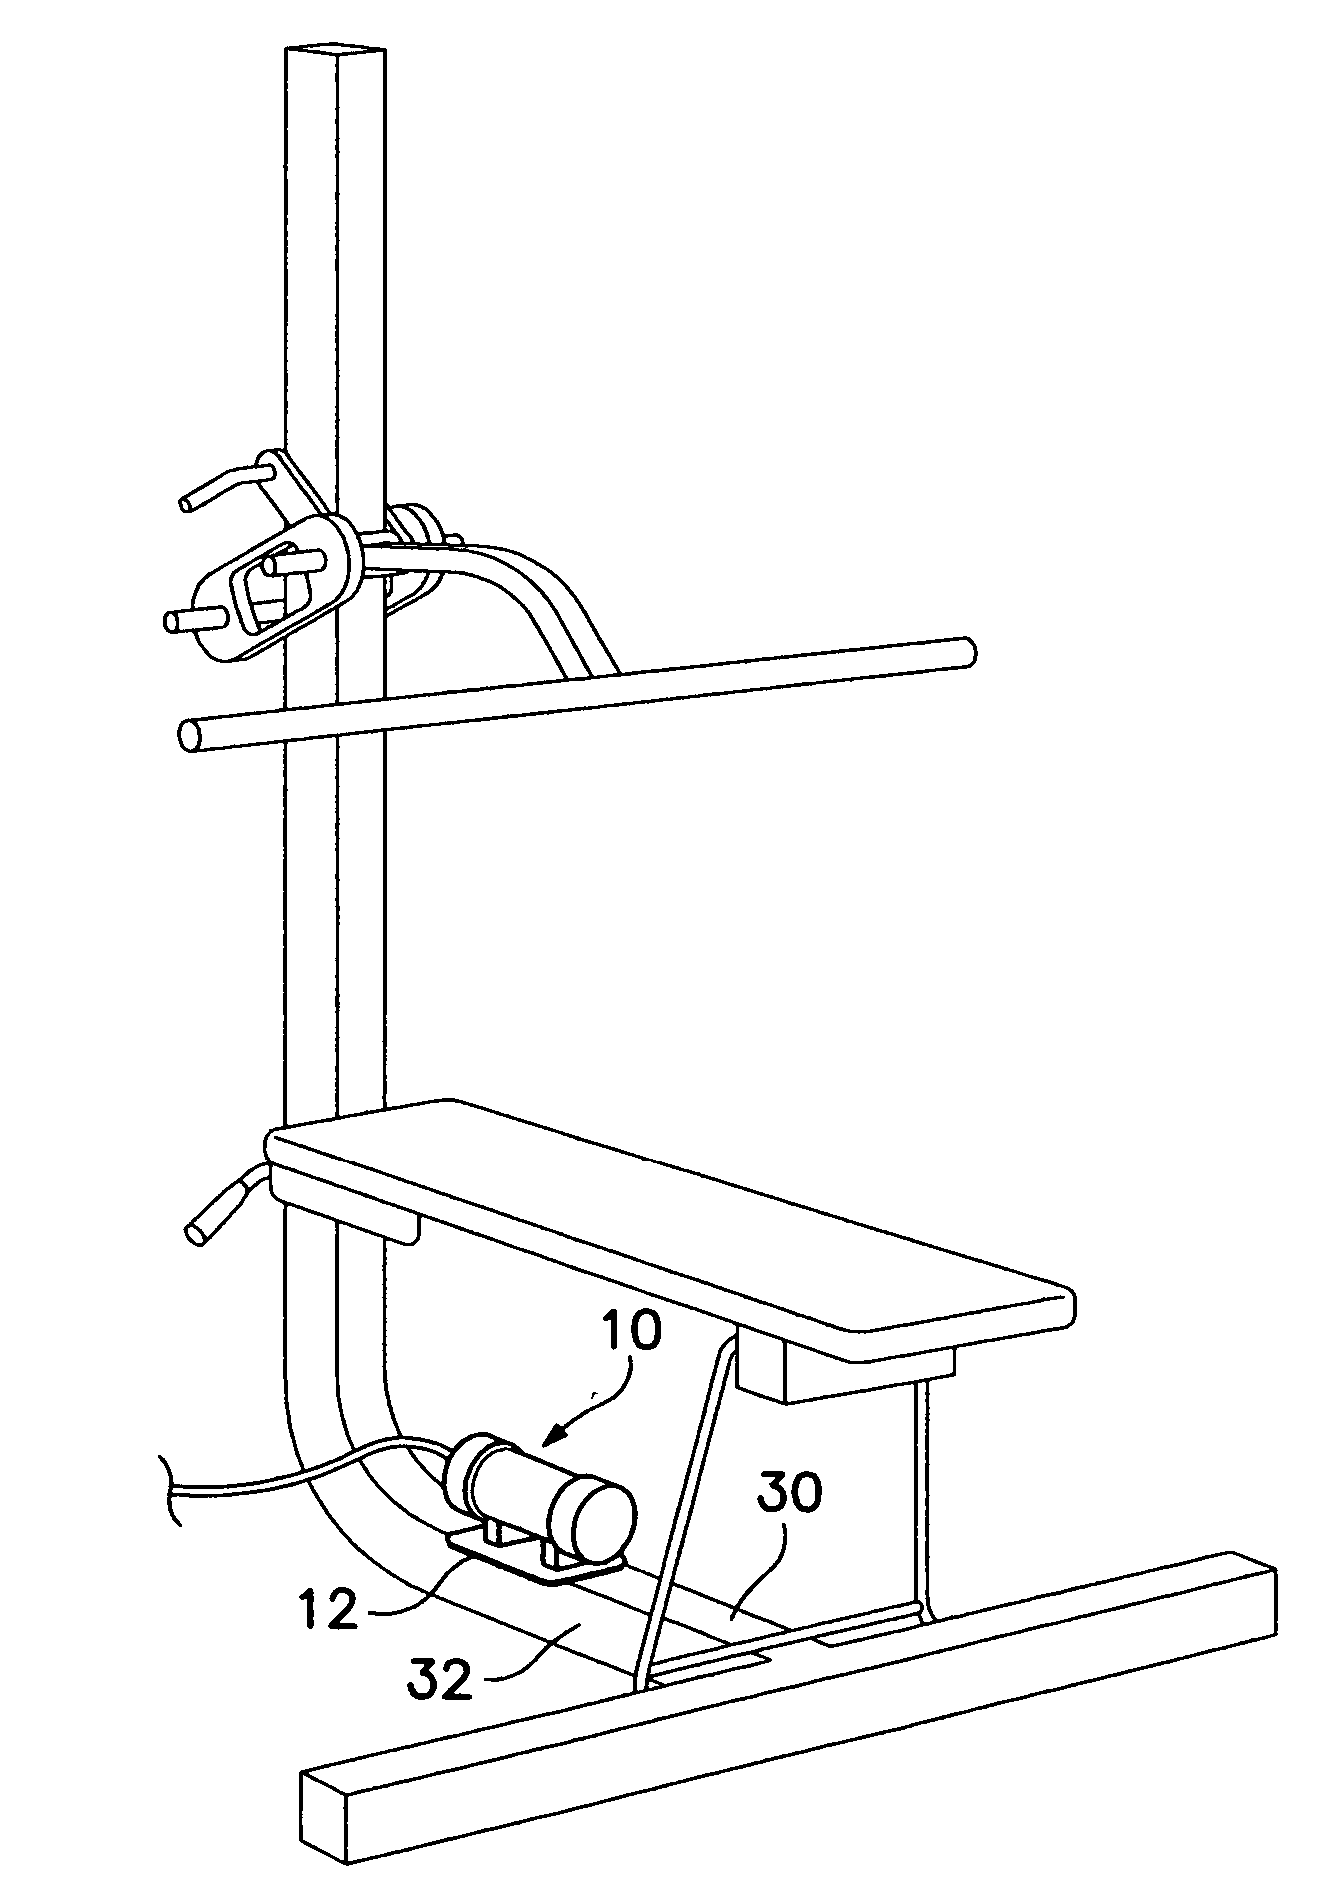 Method and apparatus for attaching a vibration unit to an exercise device